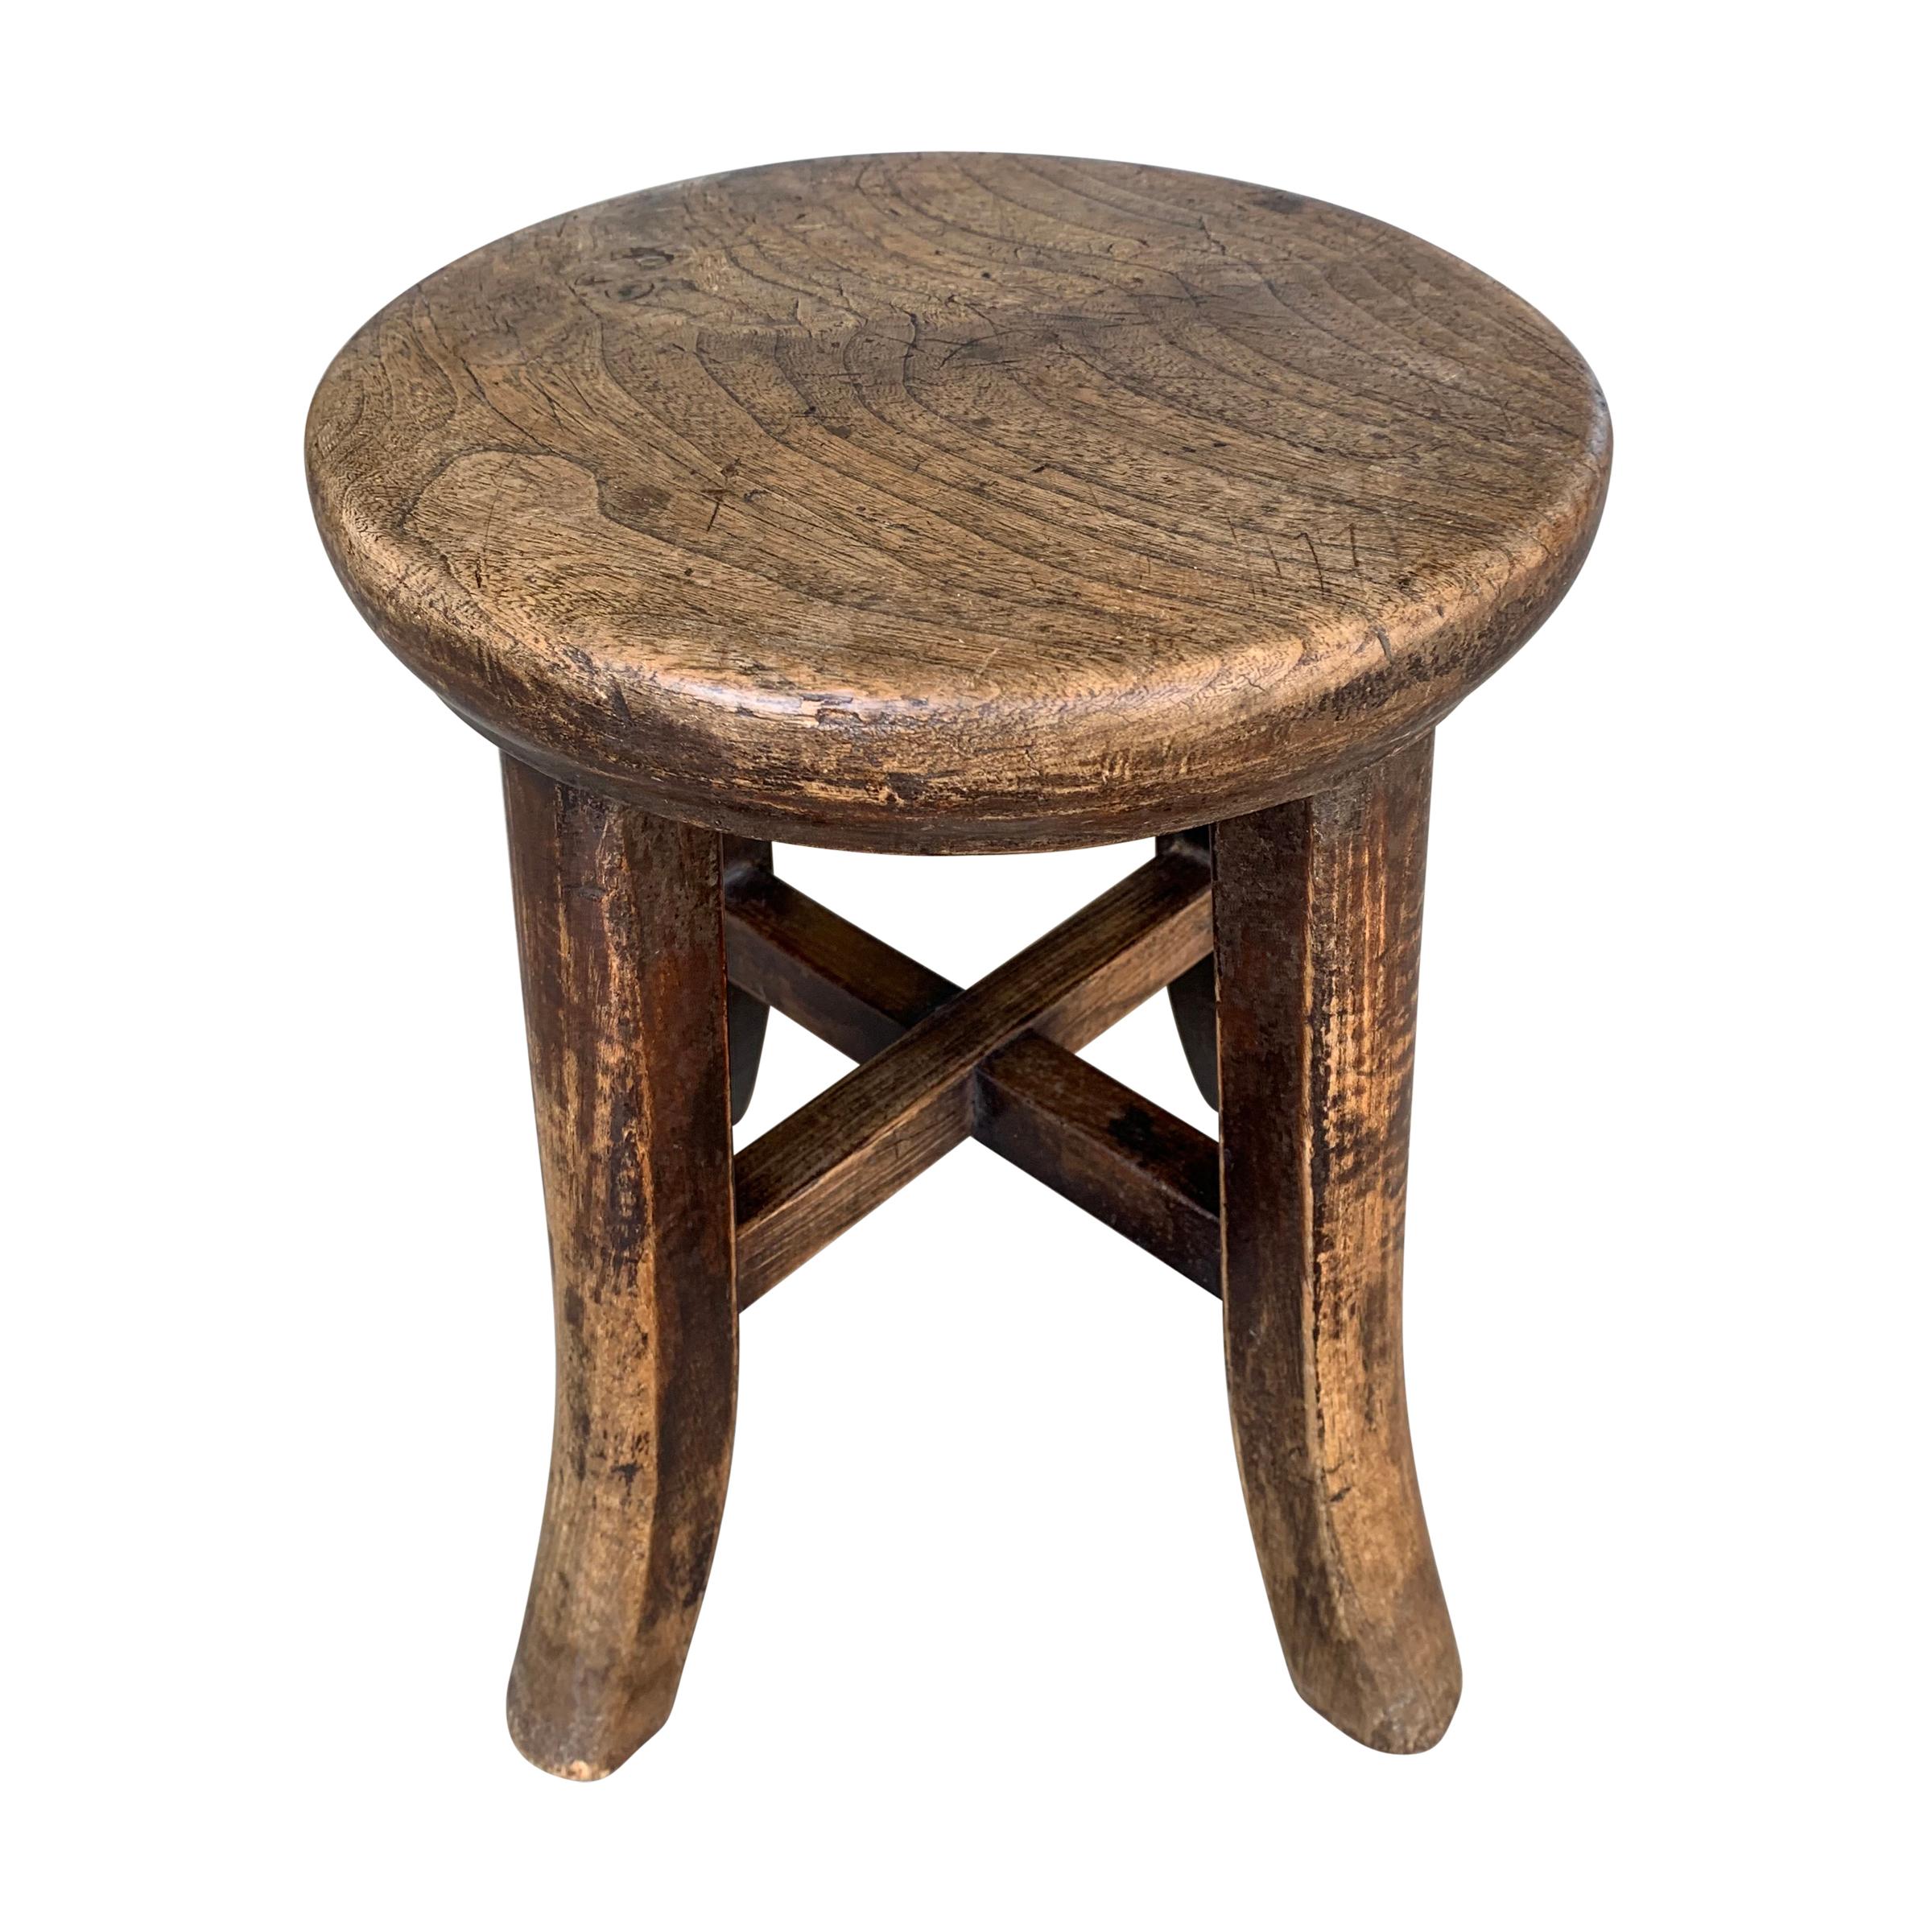 An early 20th century petite Chinese elmwood stool with legs ending in cute flared feet. The top is one solid piece of wood with rounded edges. Also serves as a small drinks table next to a low sofa or chair.